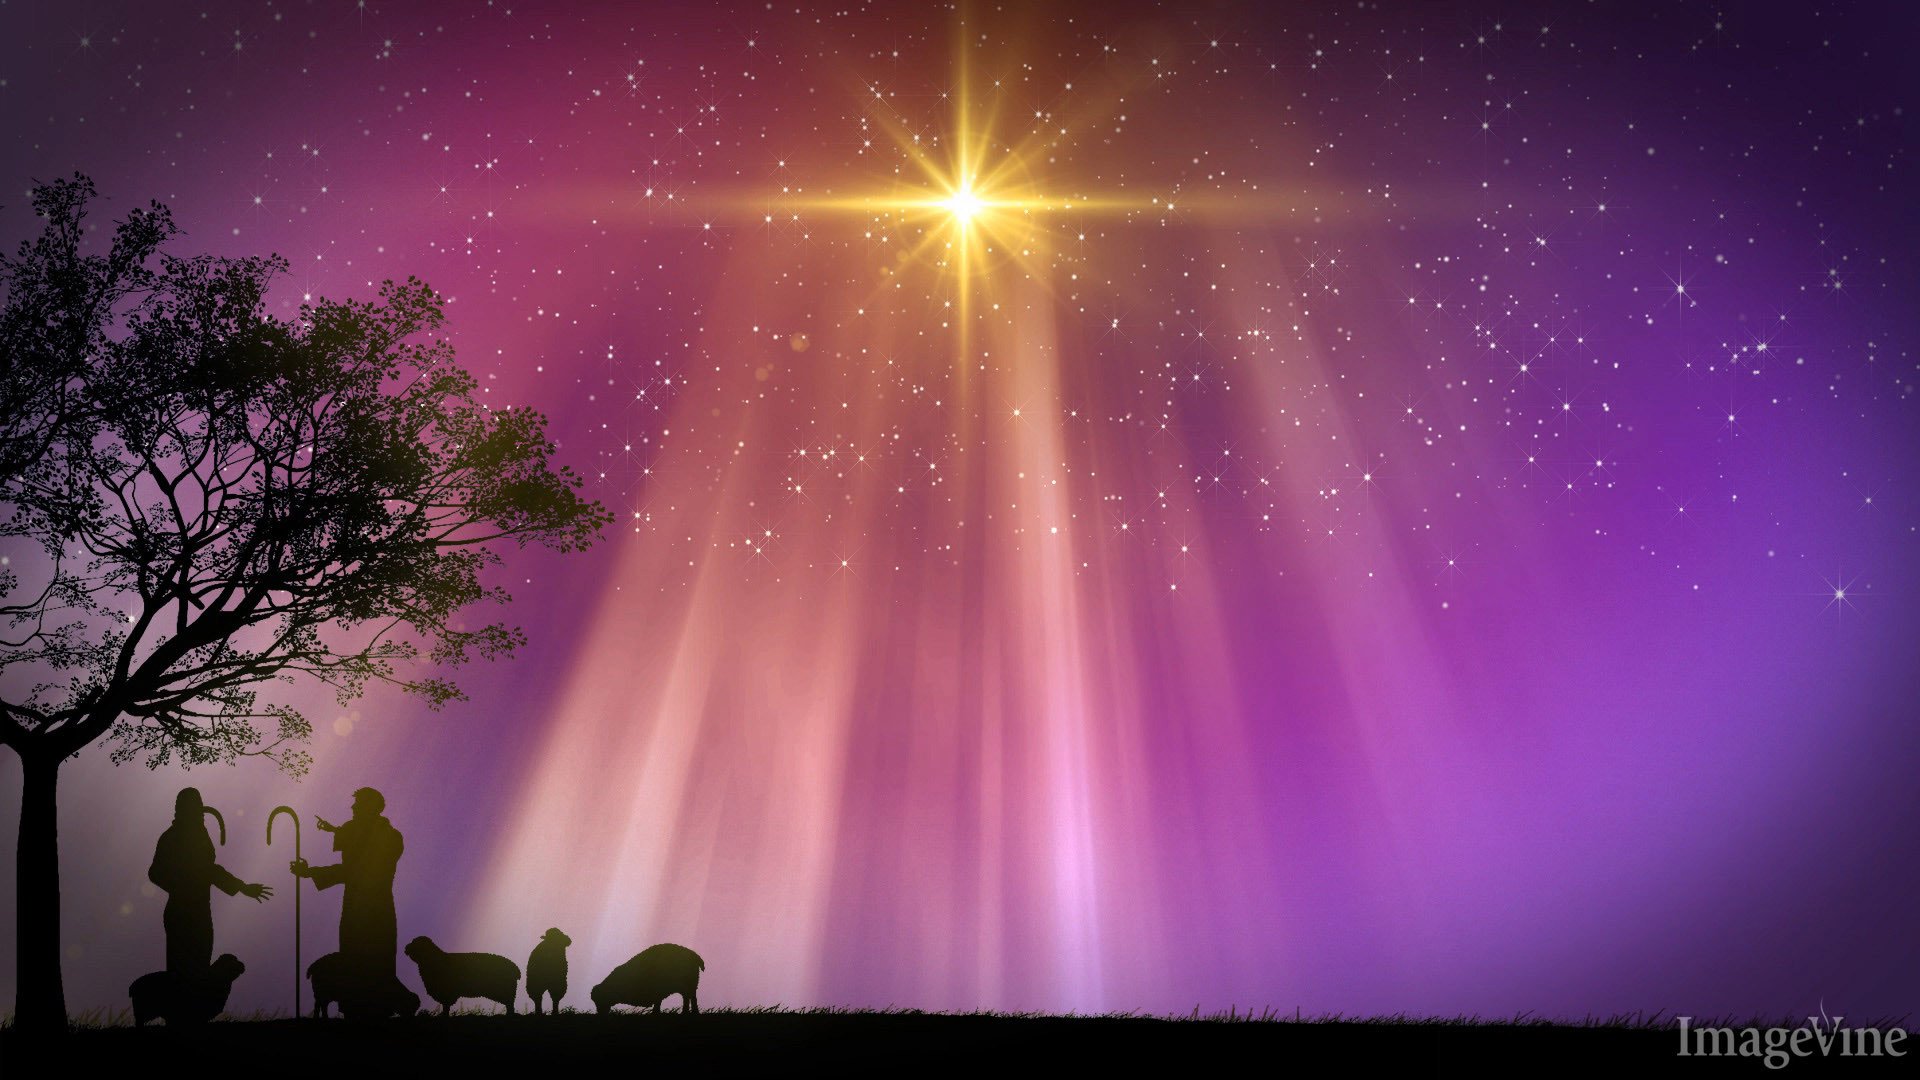 Christian Christmas Backgrounds Images and Mini Movies ImageVine